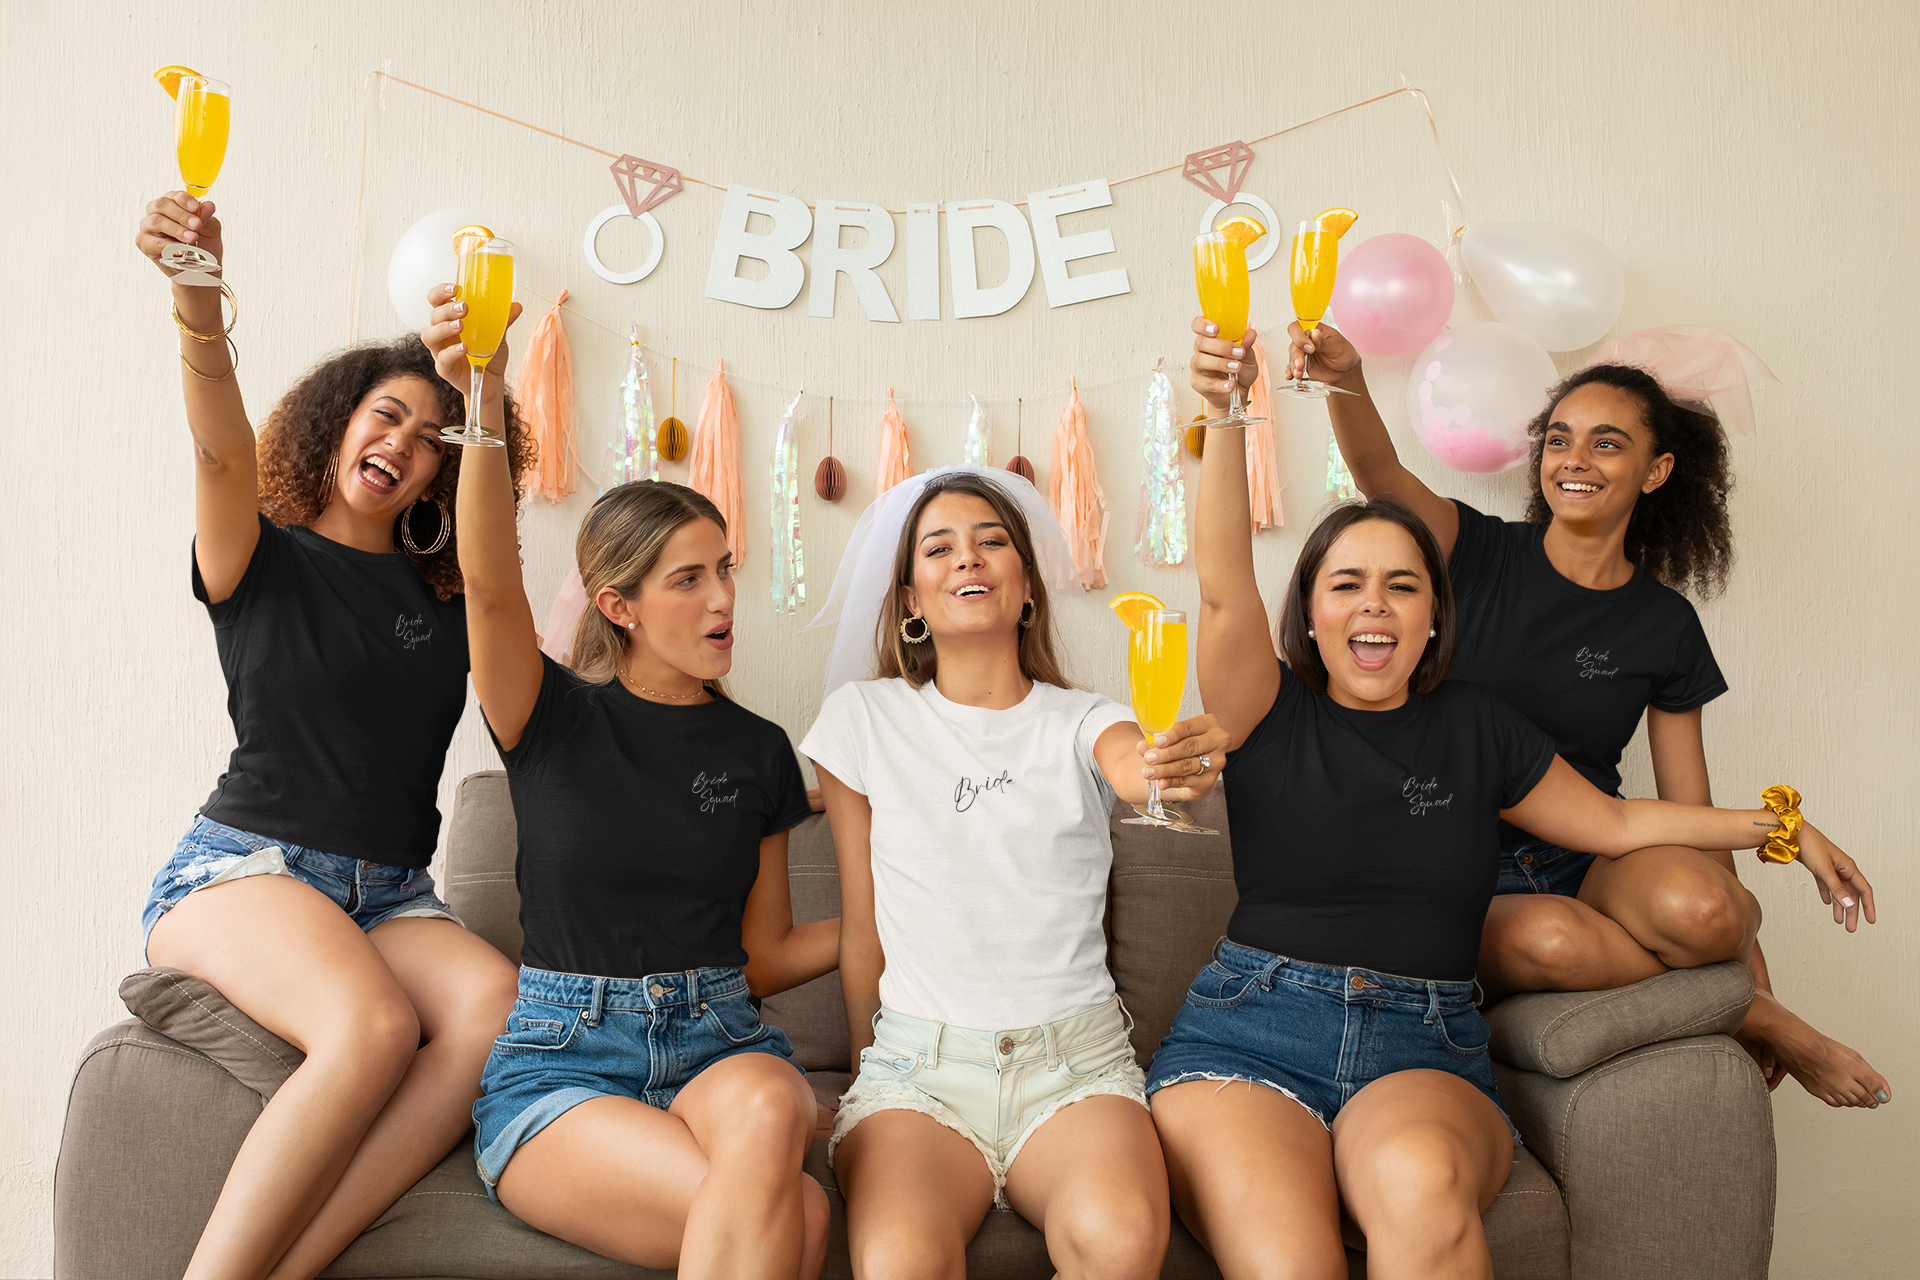 t-shirt-mockup-of-a-group-of-friends-cheering-on-a-bachelorette-party-29689_f7156486-f6c6-414d-bc1a-27330713f910.png